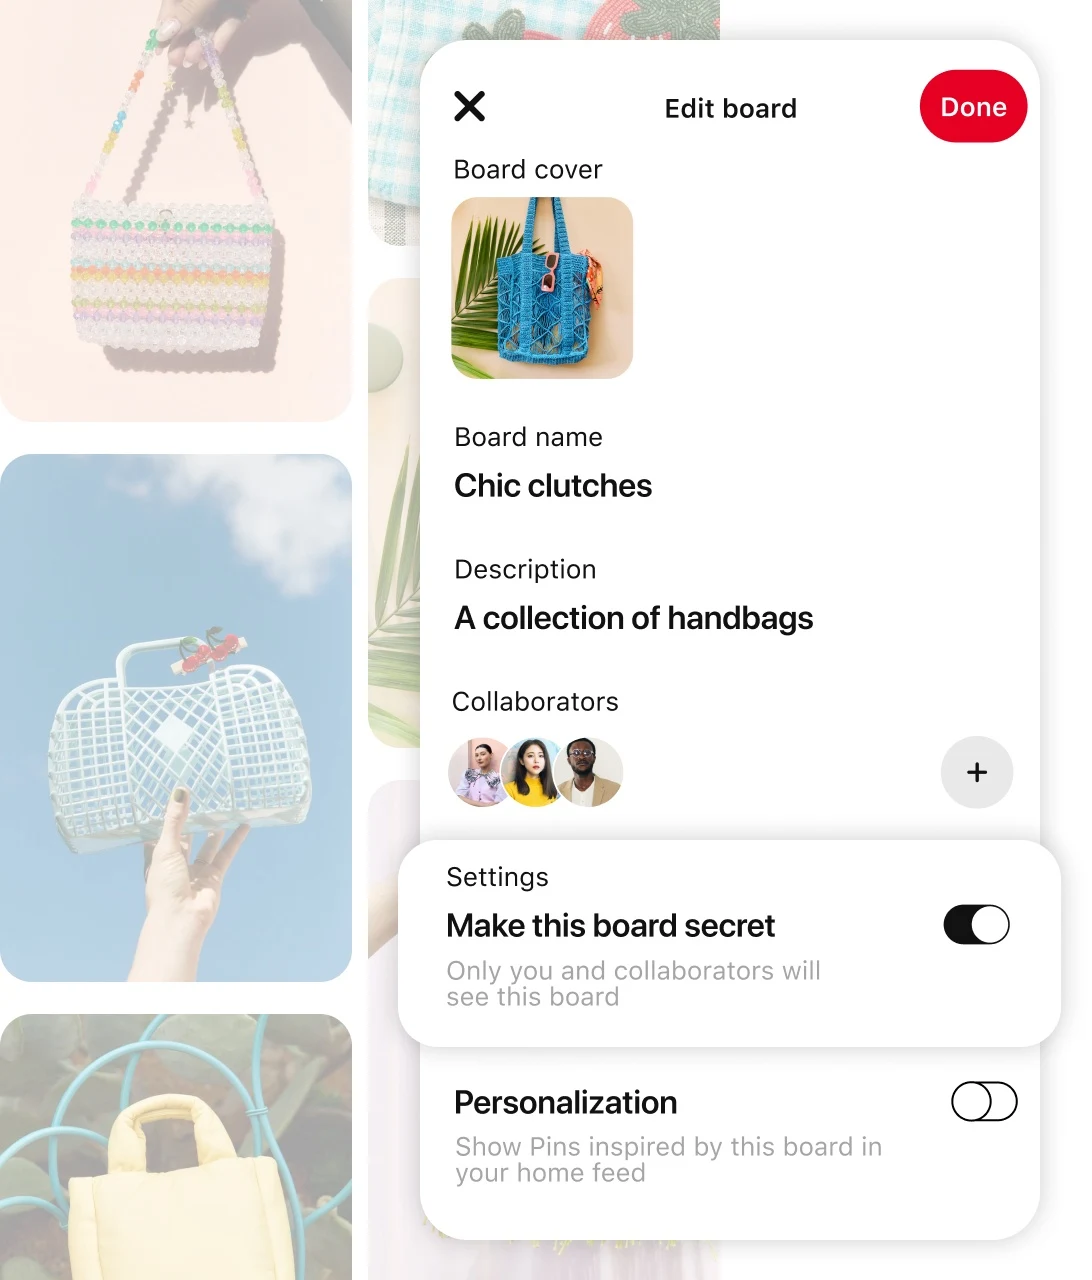 Faded pin grid including various purses with demo screen of Pinterest app feature to "Edit board" and "Make this board secret"